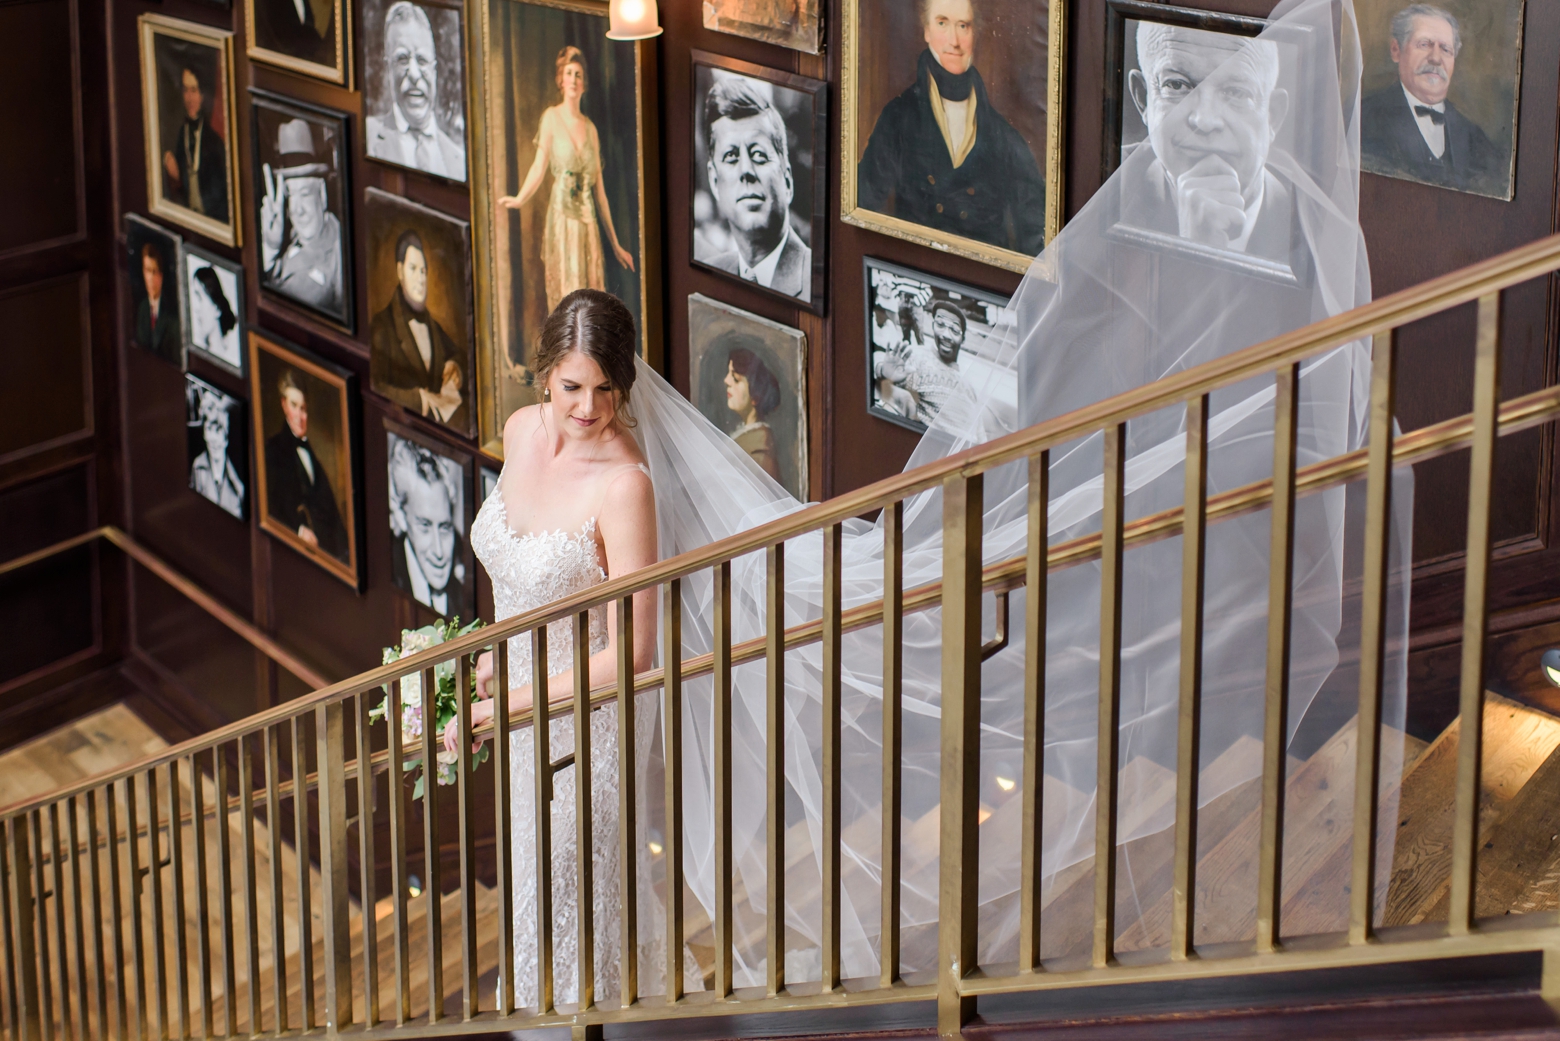 A bride stands on the grand staircase of Oxford Exchange while her cathedral veil blows